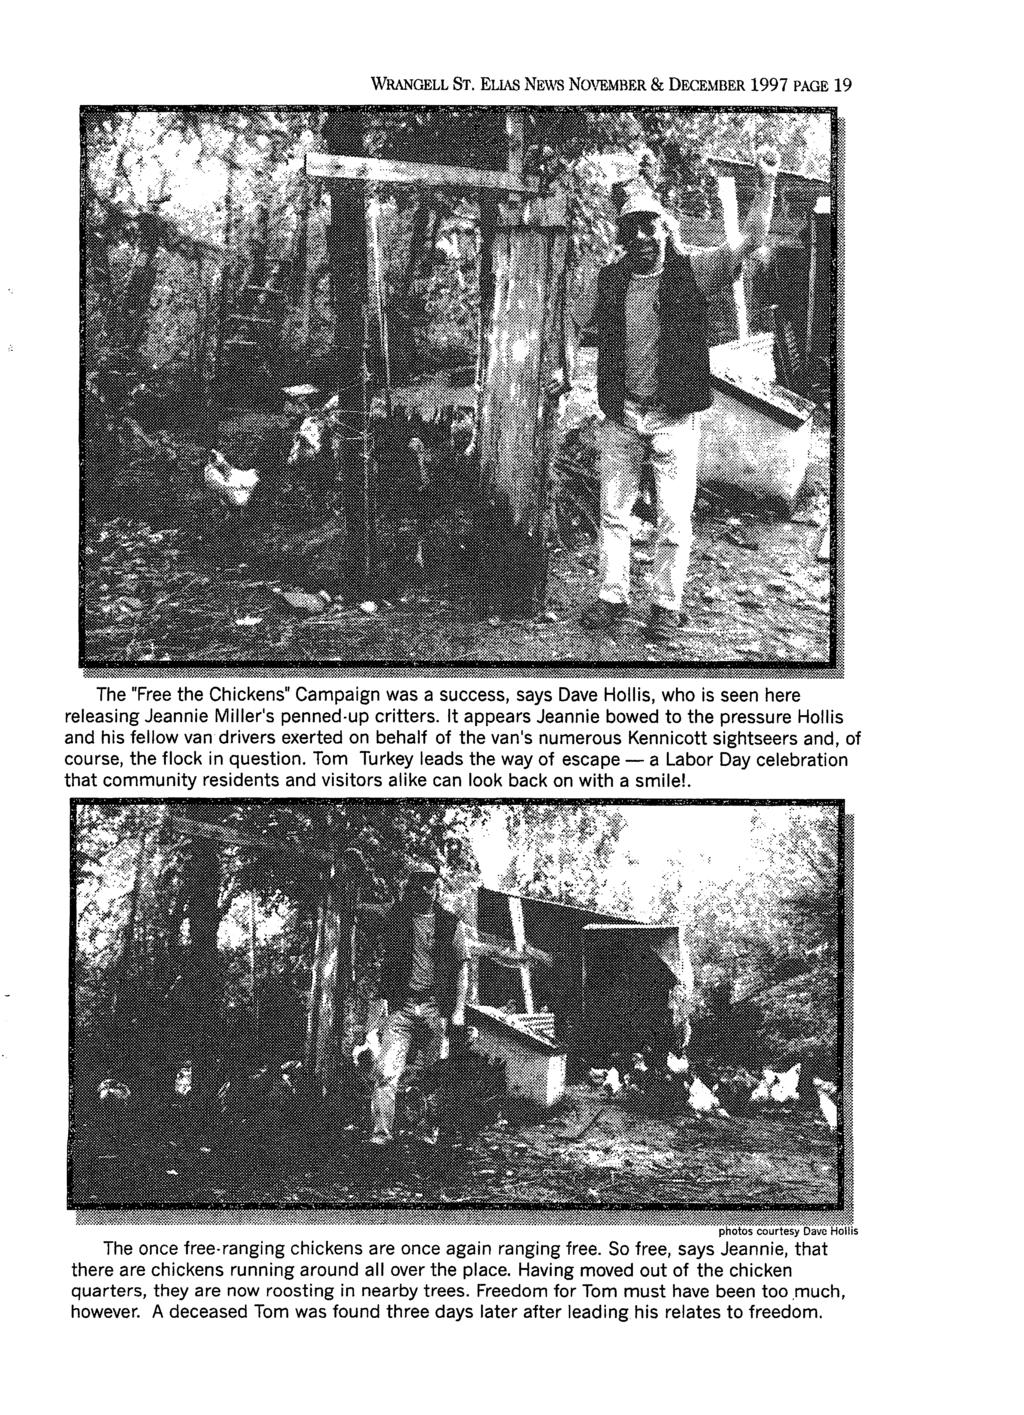 WRANGELL ST. ELIAS NEWS NOVEMBER & DECEMBER 1997 PAGE 19 The "Free the Chickens" Campaign was a success, says Dave Hollis, who is seen here releasing Jeannie Miller's penned-up critters.